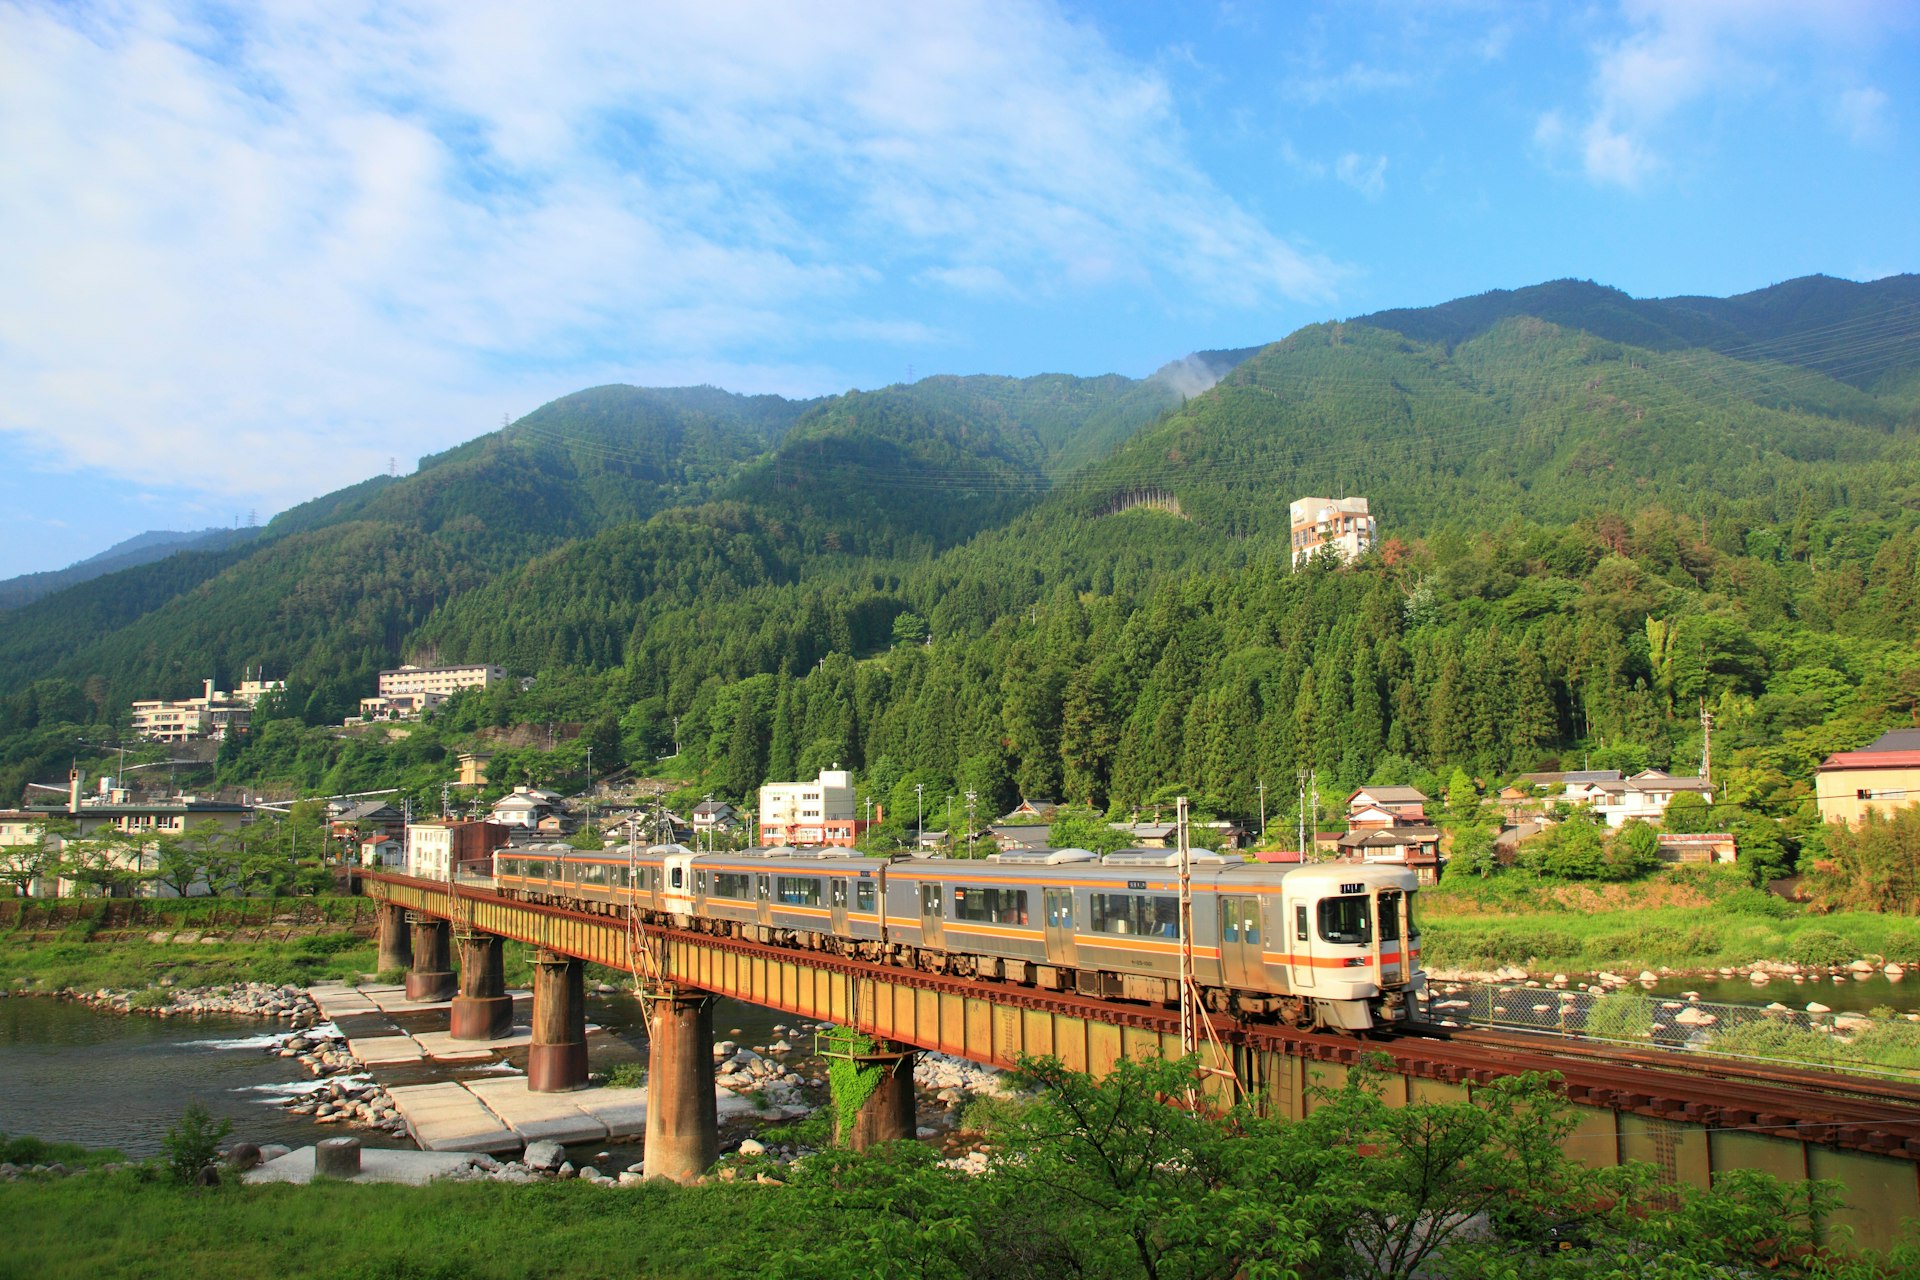 A train in the countryside of Gero Onsen, Gifu Prefecture, Japan